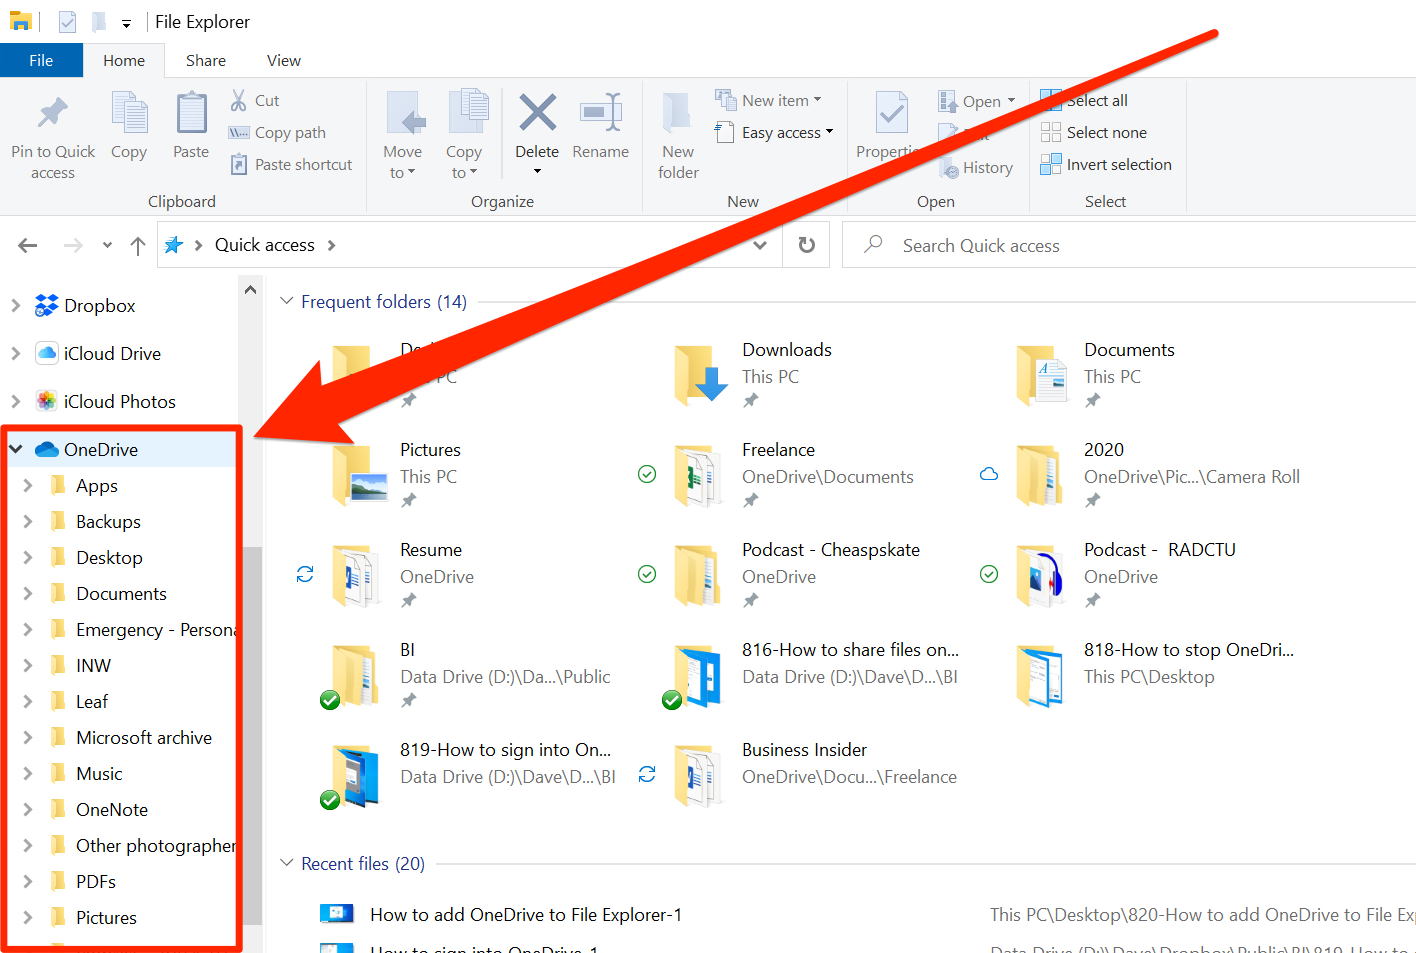 onedrive app for windows 7 download